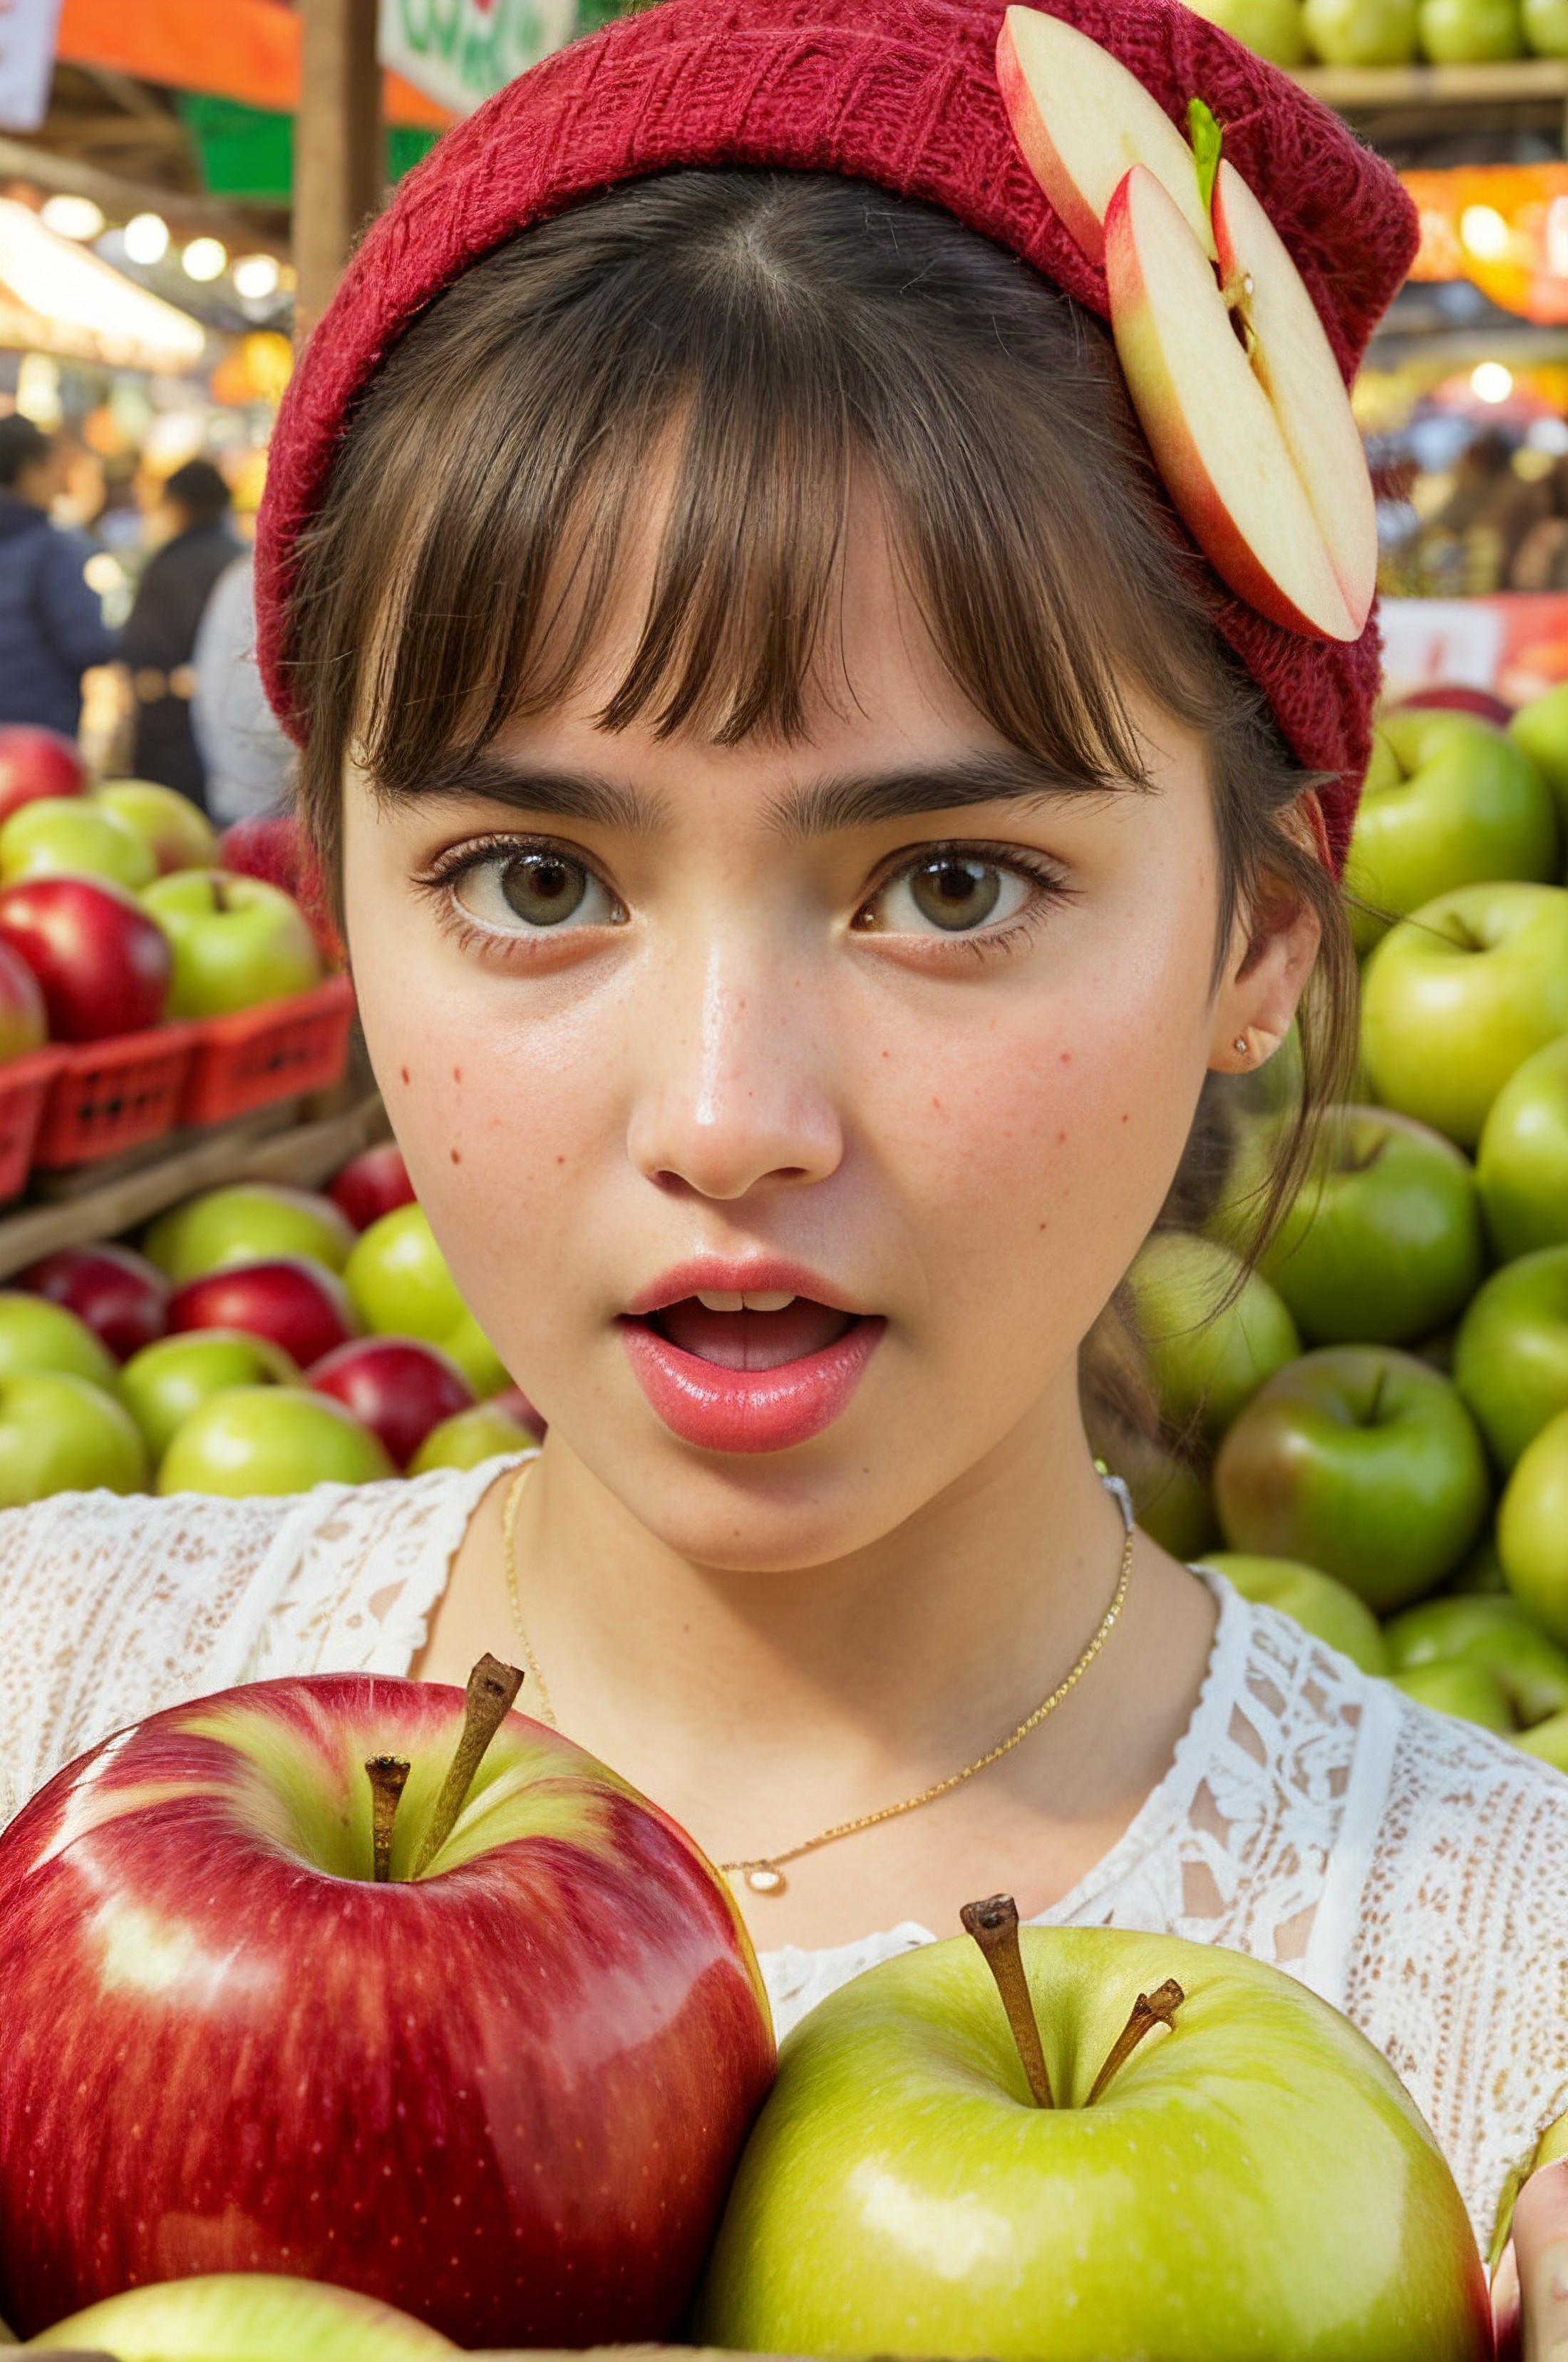 A person with apples for eyes, surprised expression, in a fruit market, cartoon style